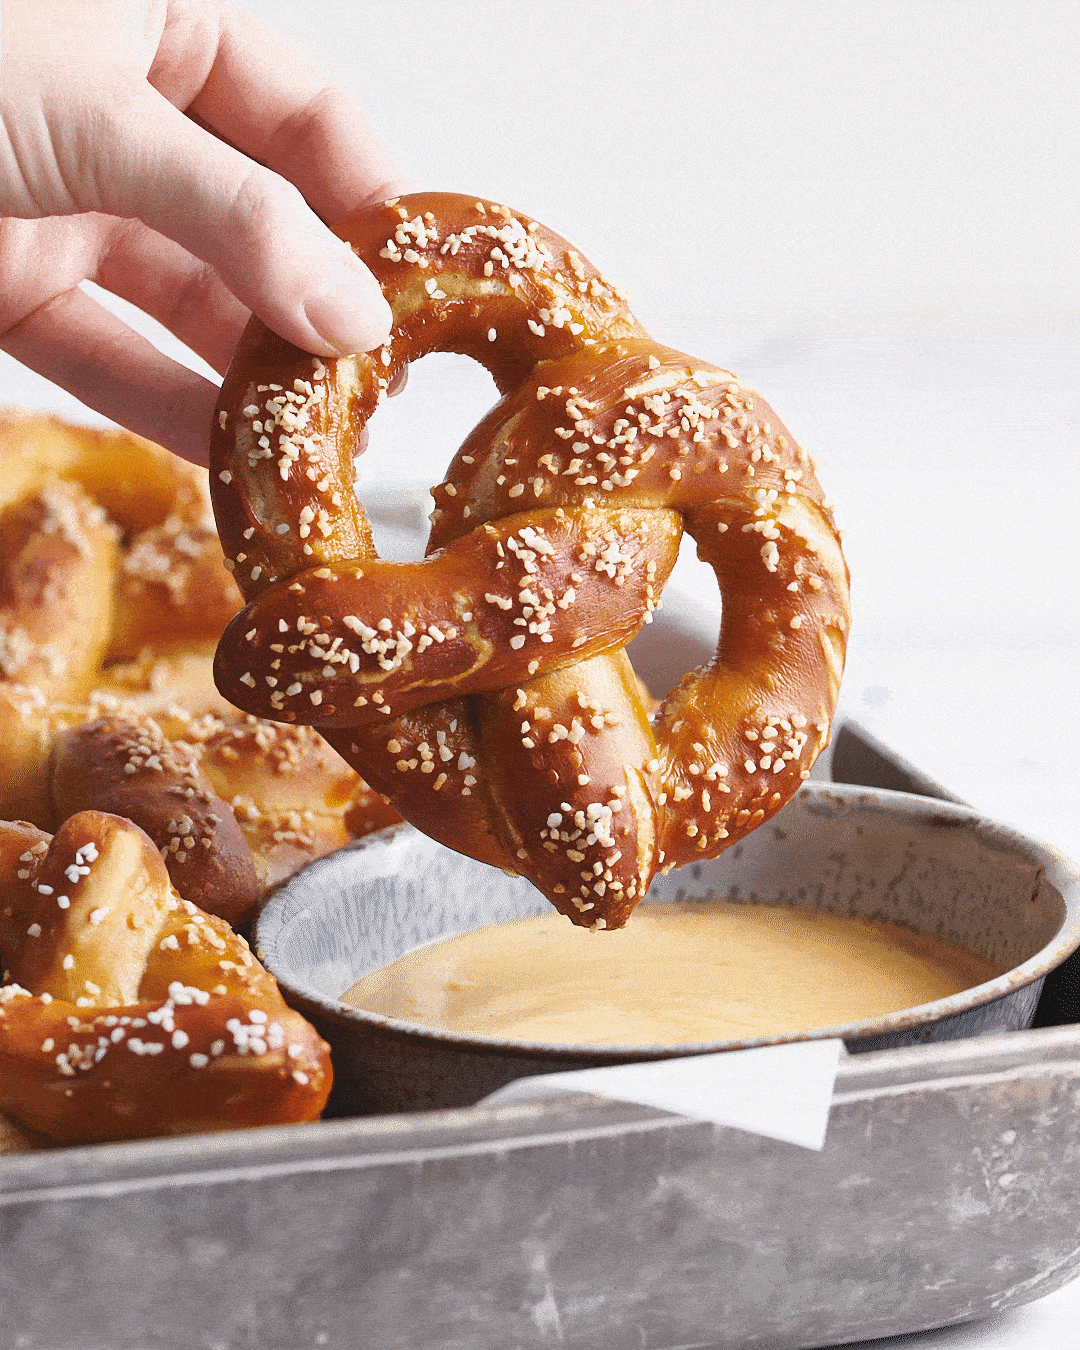 homemade pretzel being dunked into beer cheese dip